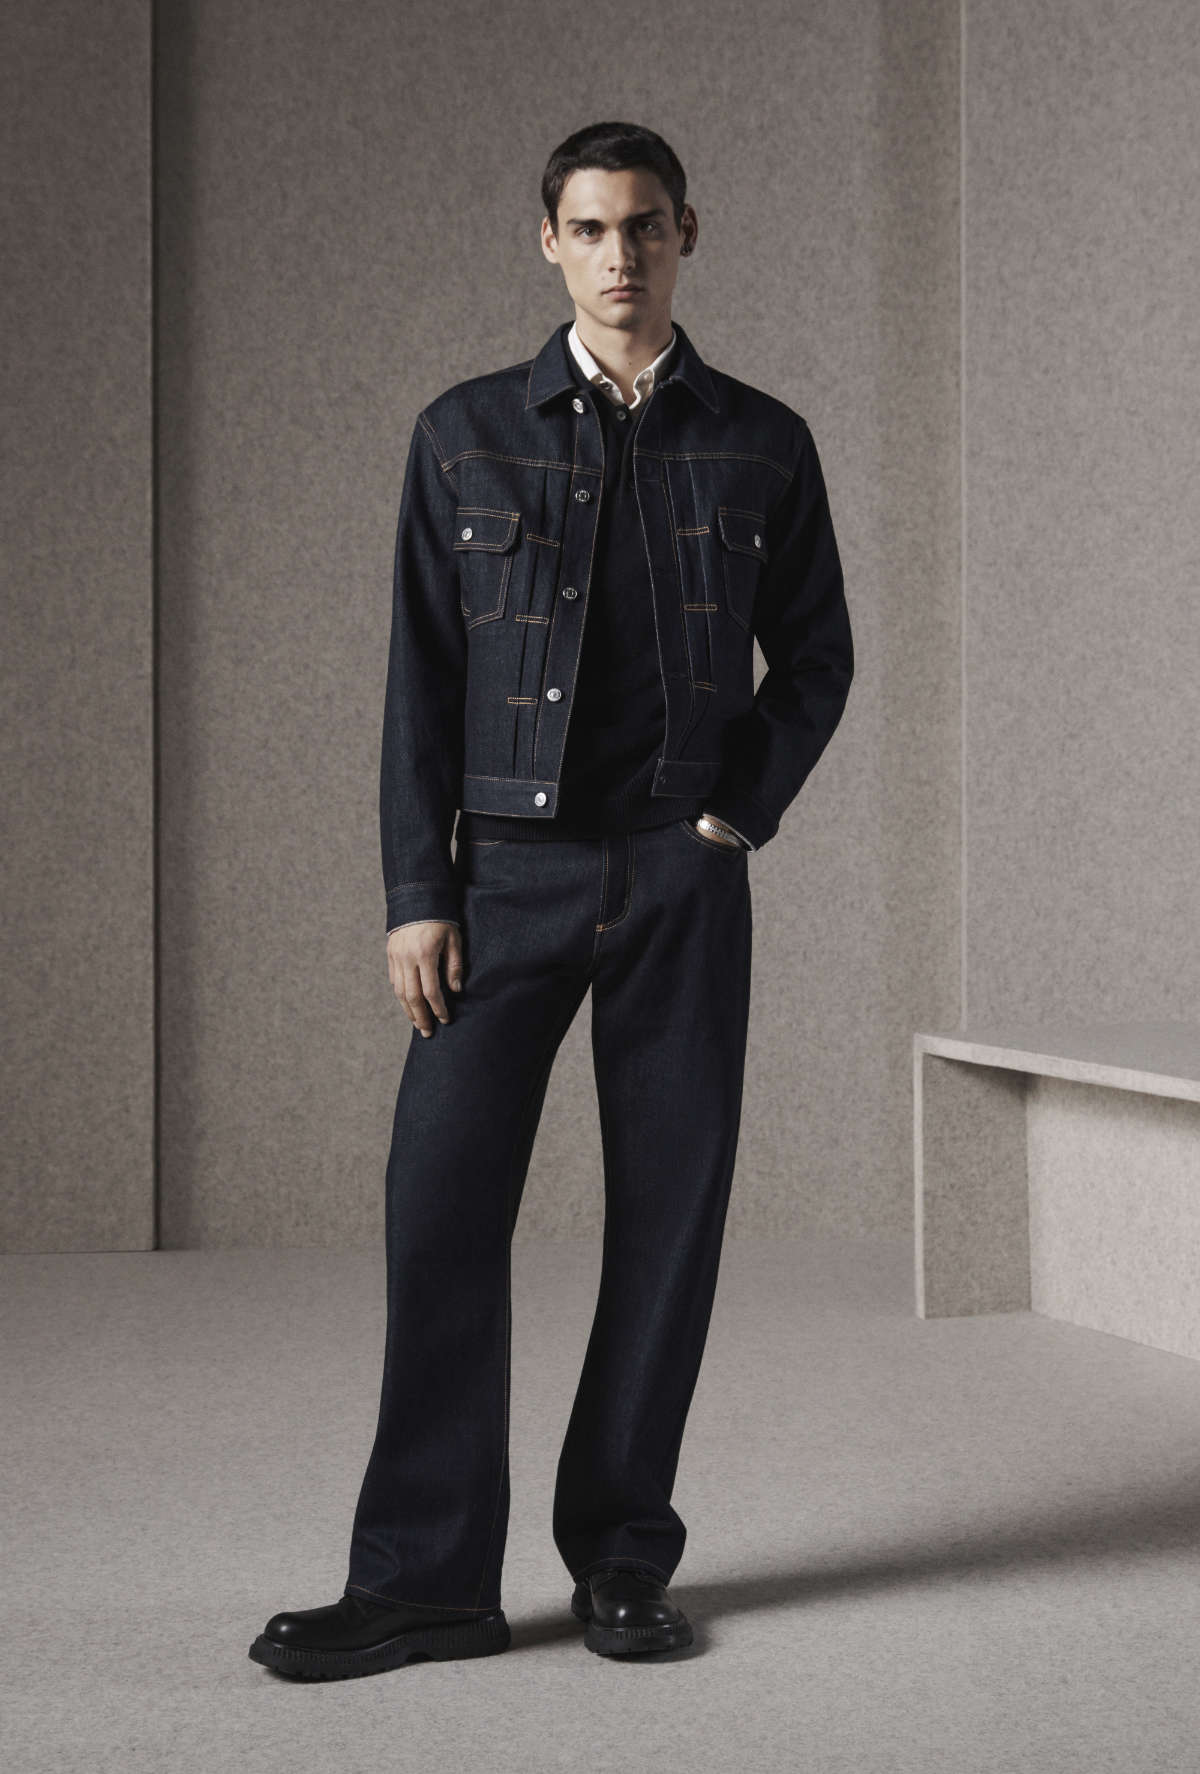 Dior Presents Its New Ready-to-Wear 2024 Menswear Capsule Collection - Dior Icons